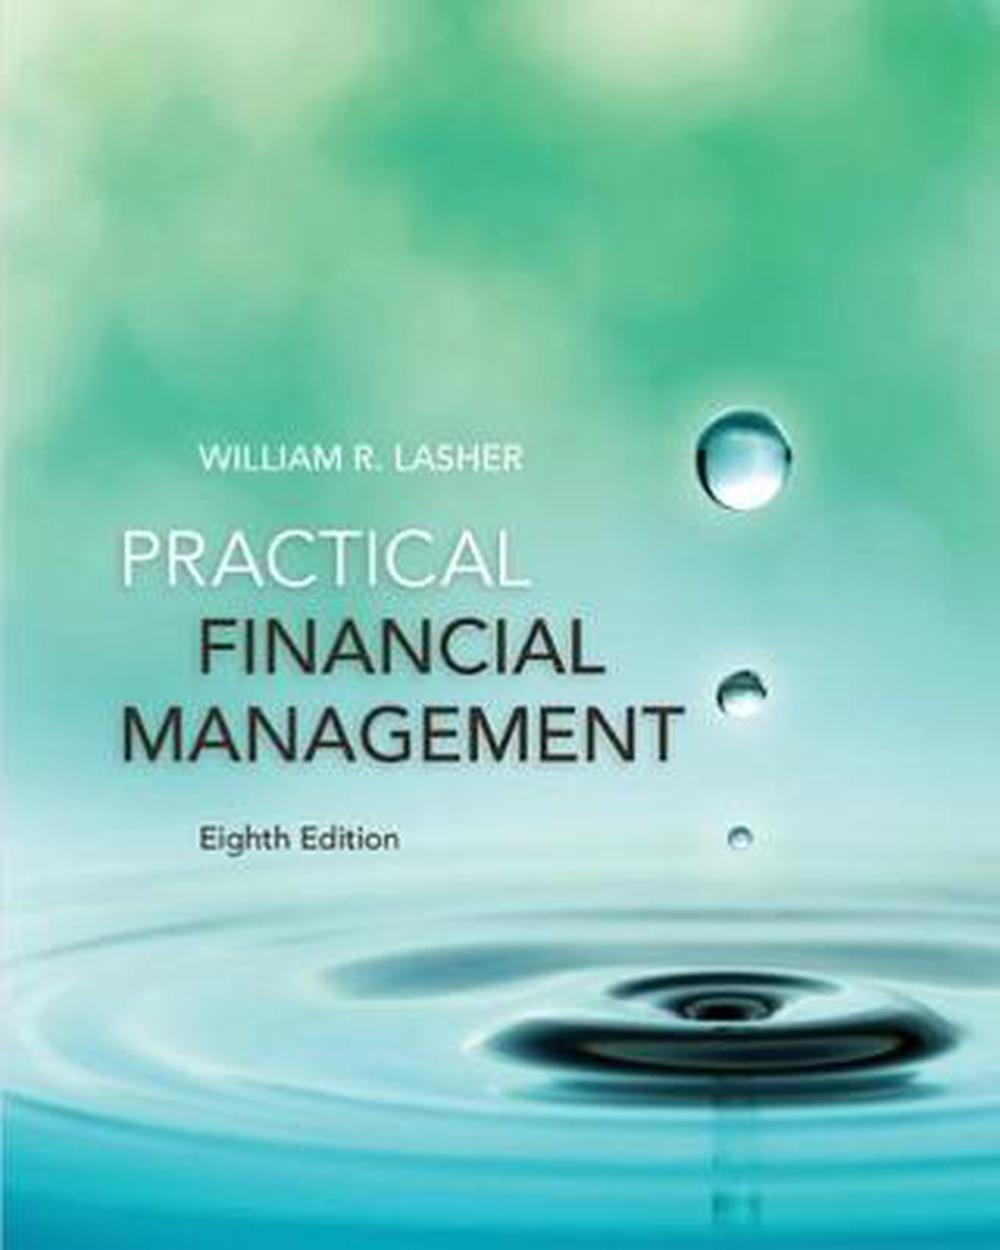 Practical Financial Management by William R. Lasher, Hardcover, 9781305637542 Buy online at